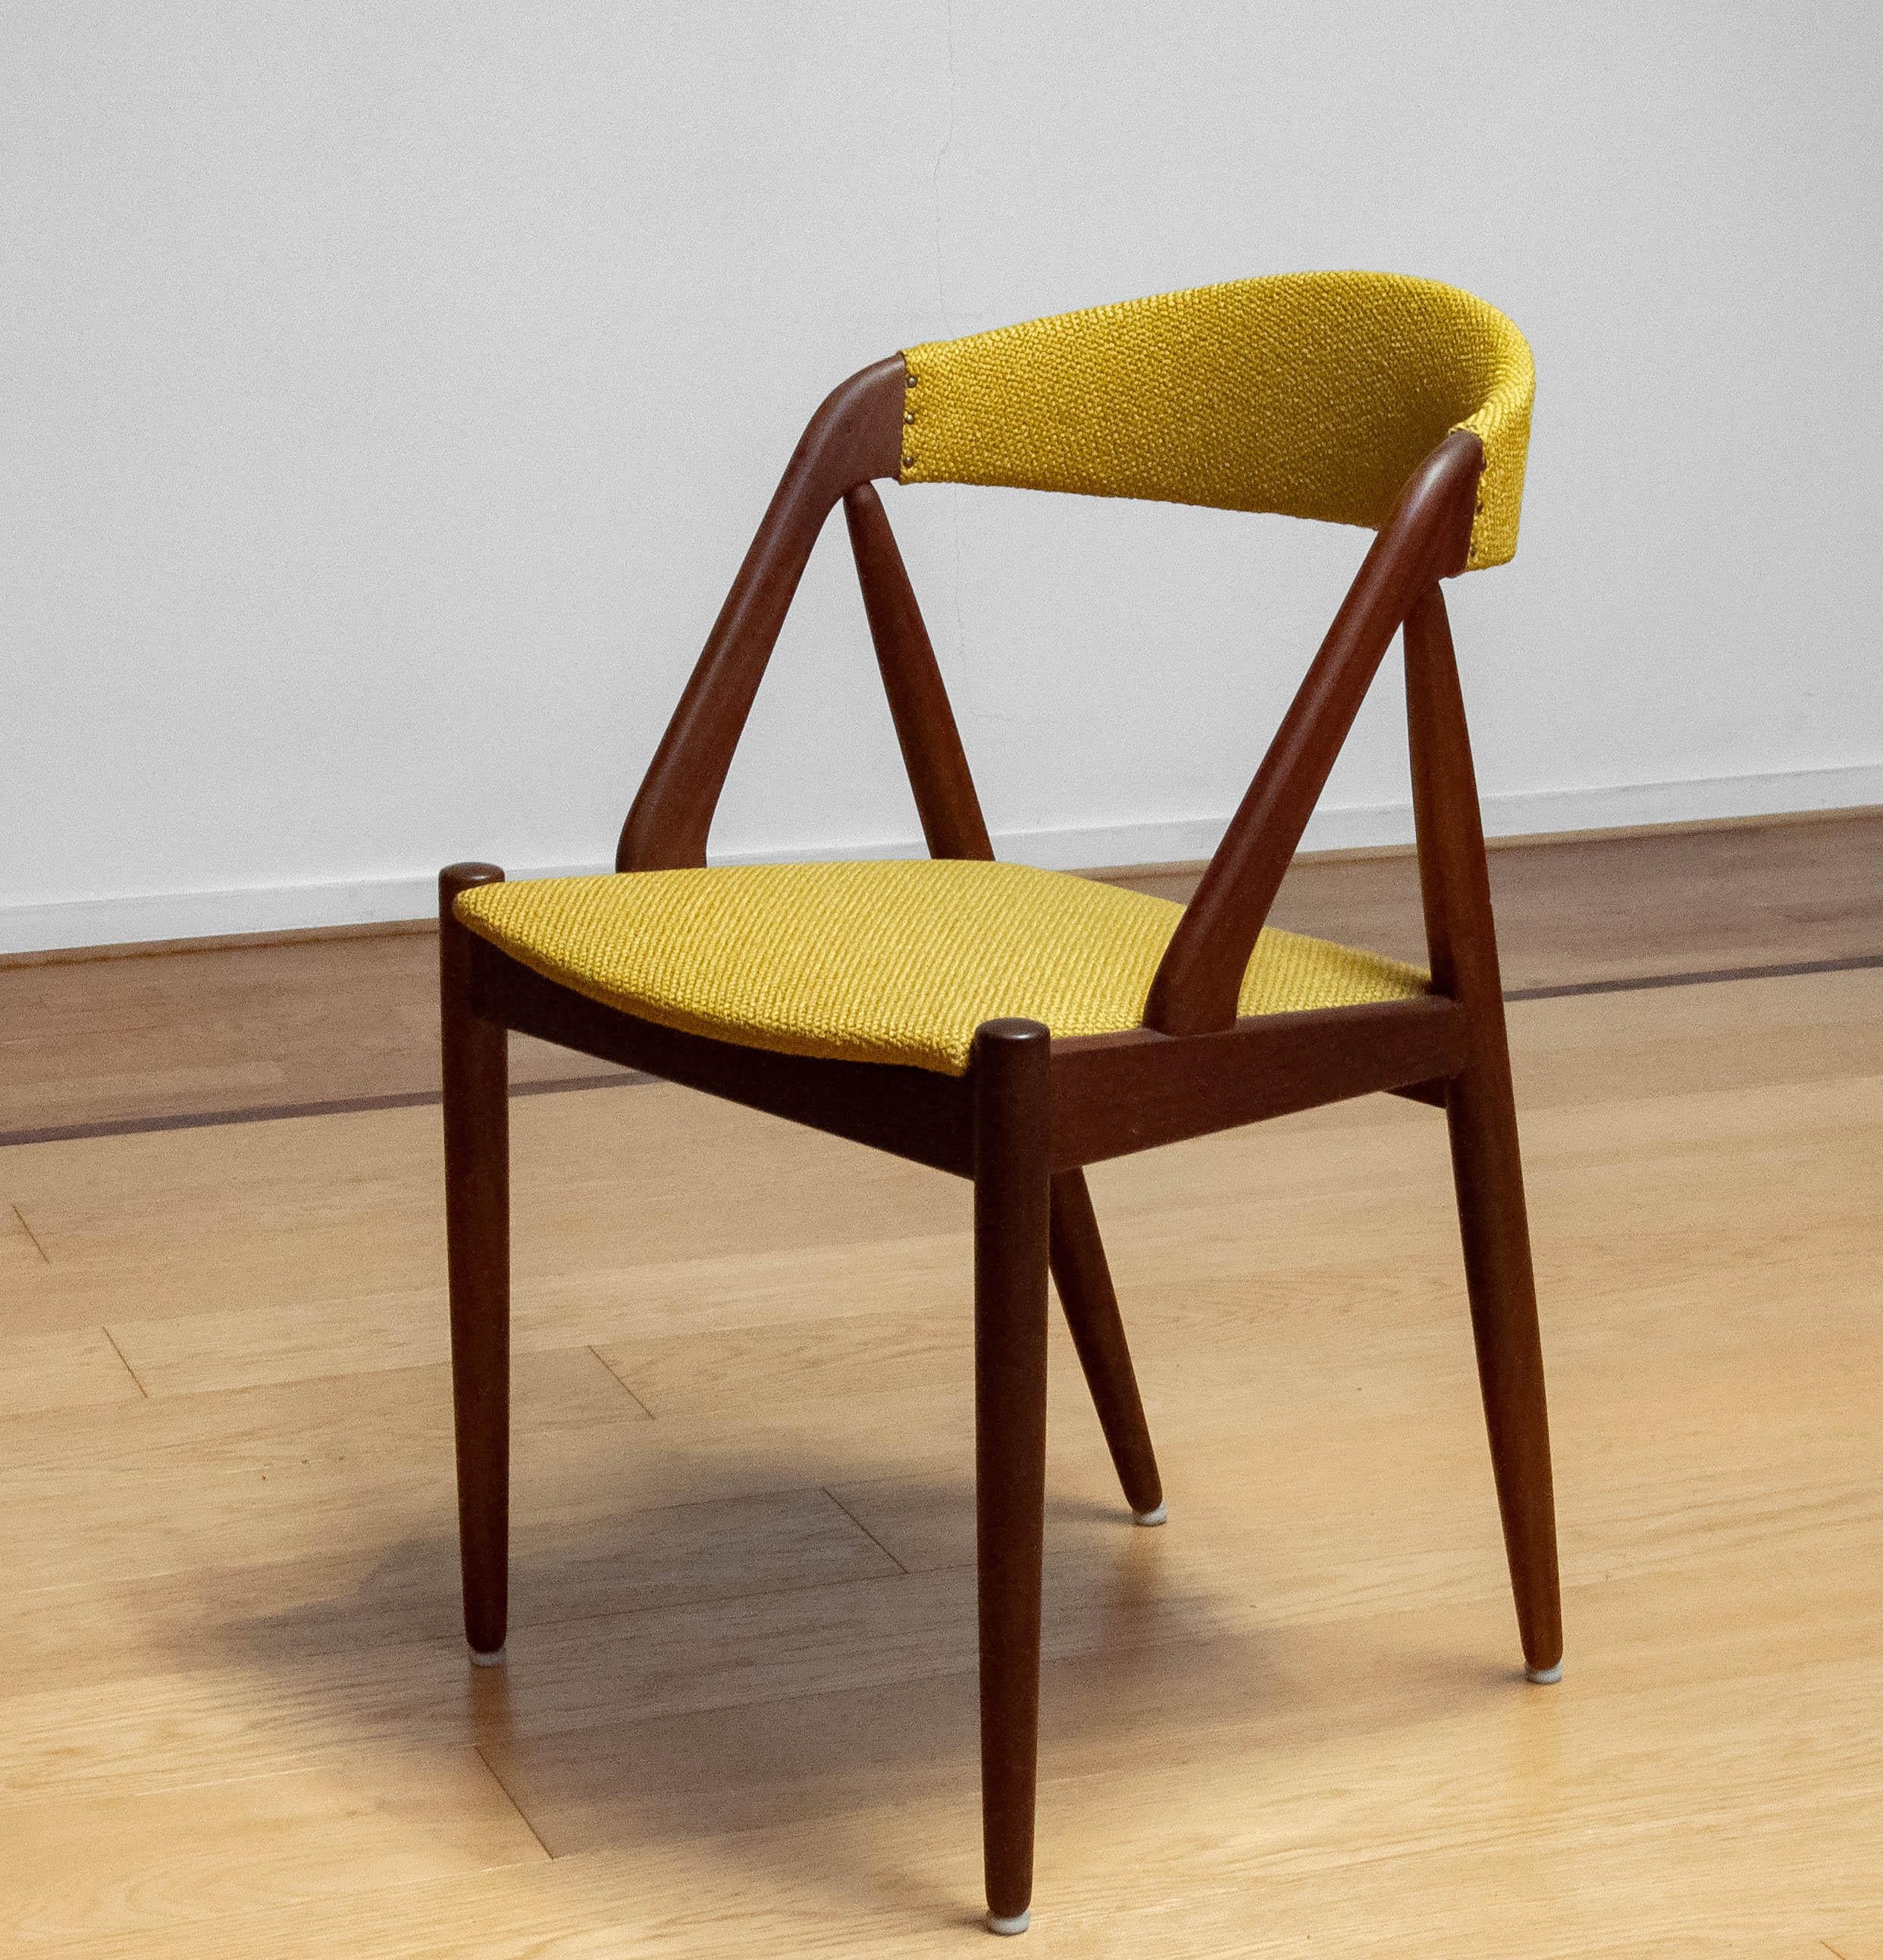 1960 Danish Yellow Ochre Upholstered Dining Chairs 'Model 31' by Kai Kristiansen In Excellent Condition For Sale In Silvolde, Gelderland